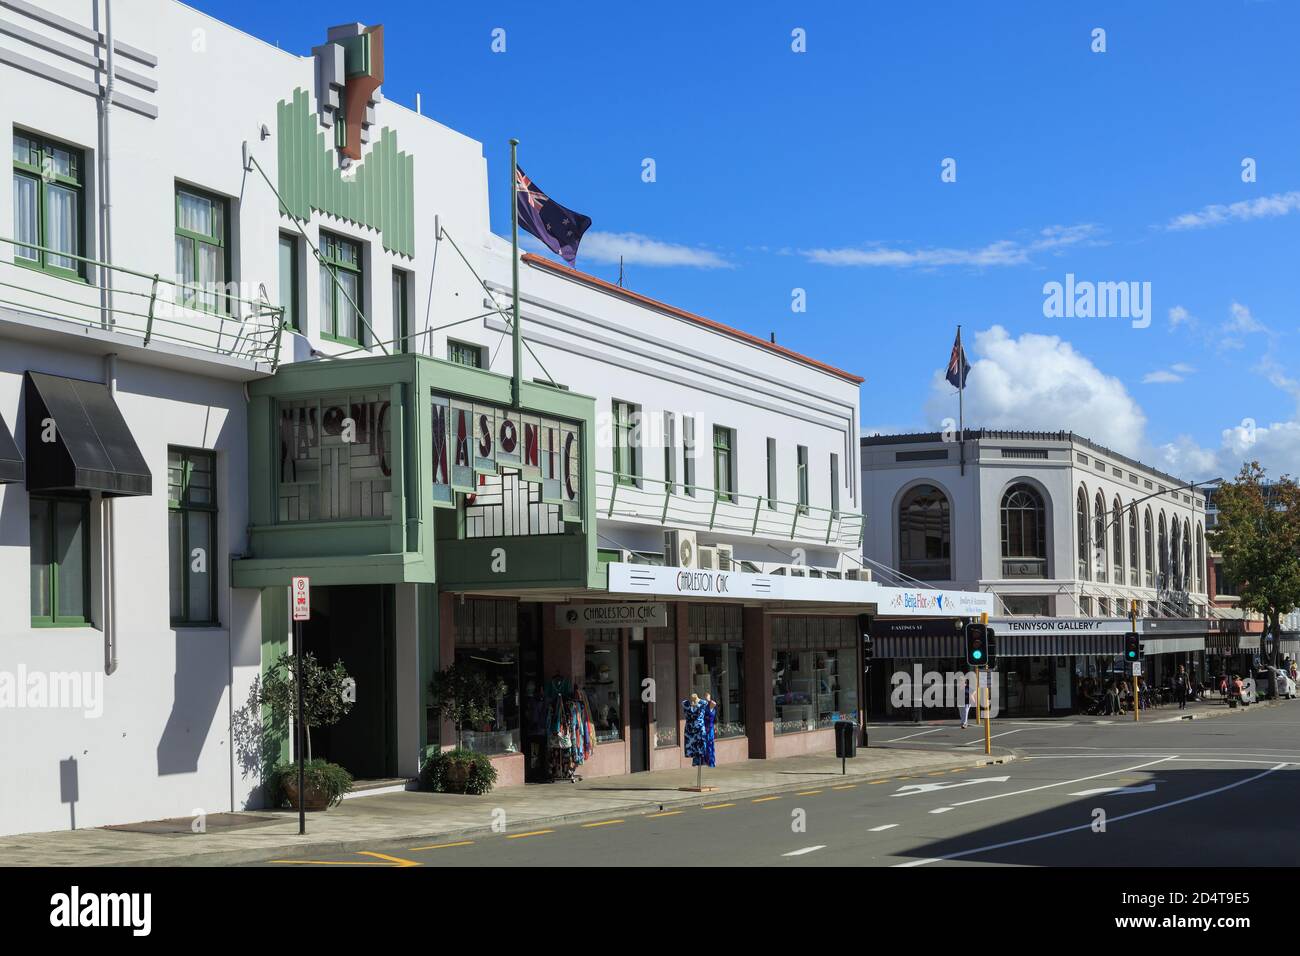 Napier, New Zealand. The historic Masonic Hotel, built in 1932, part of the city's rich Art Deco heritage Stock Photo